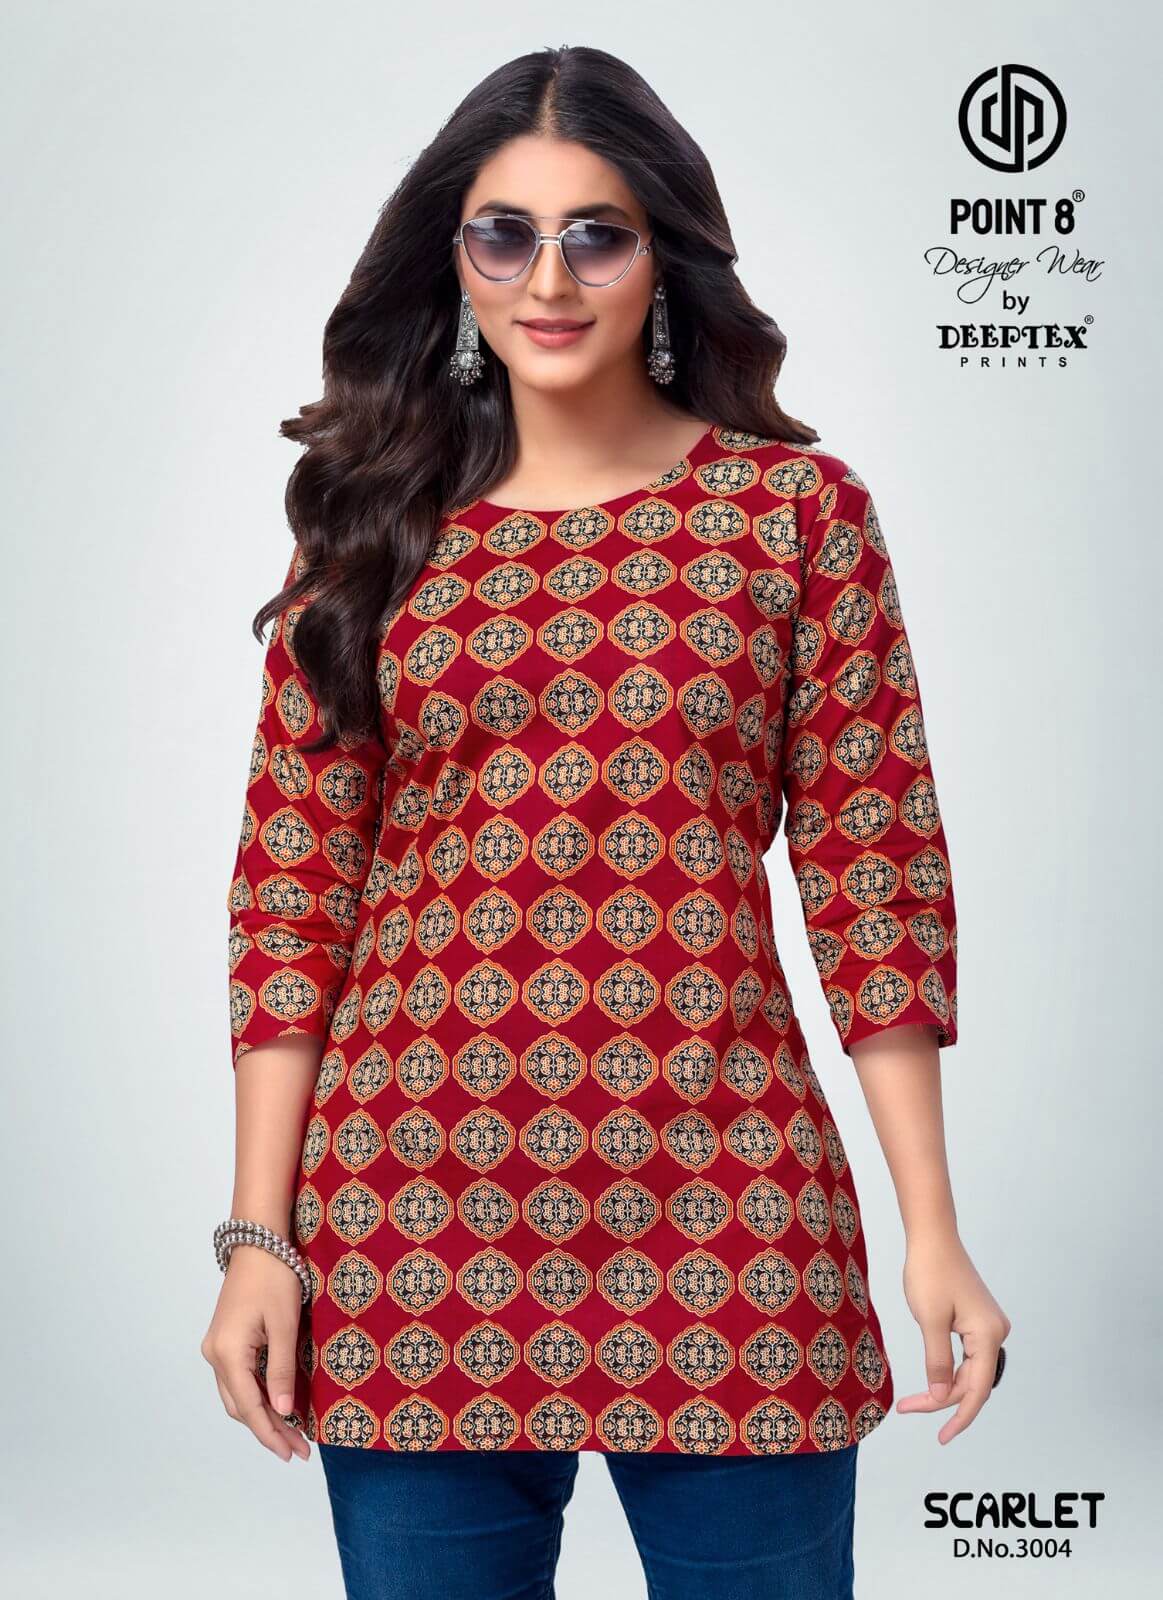 Deeptex Point 8 Scarlet Vol 3 Ladies Top Catalog collection 8